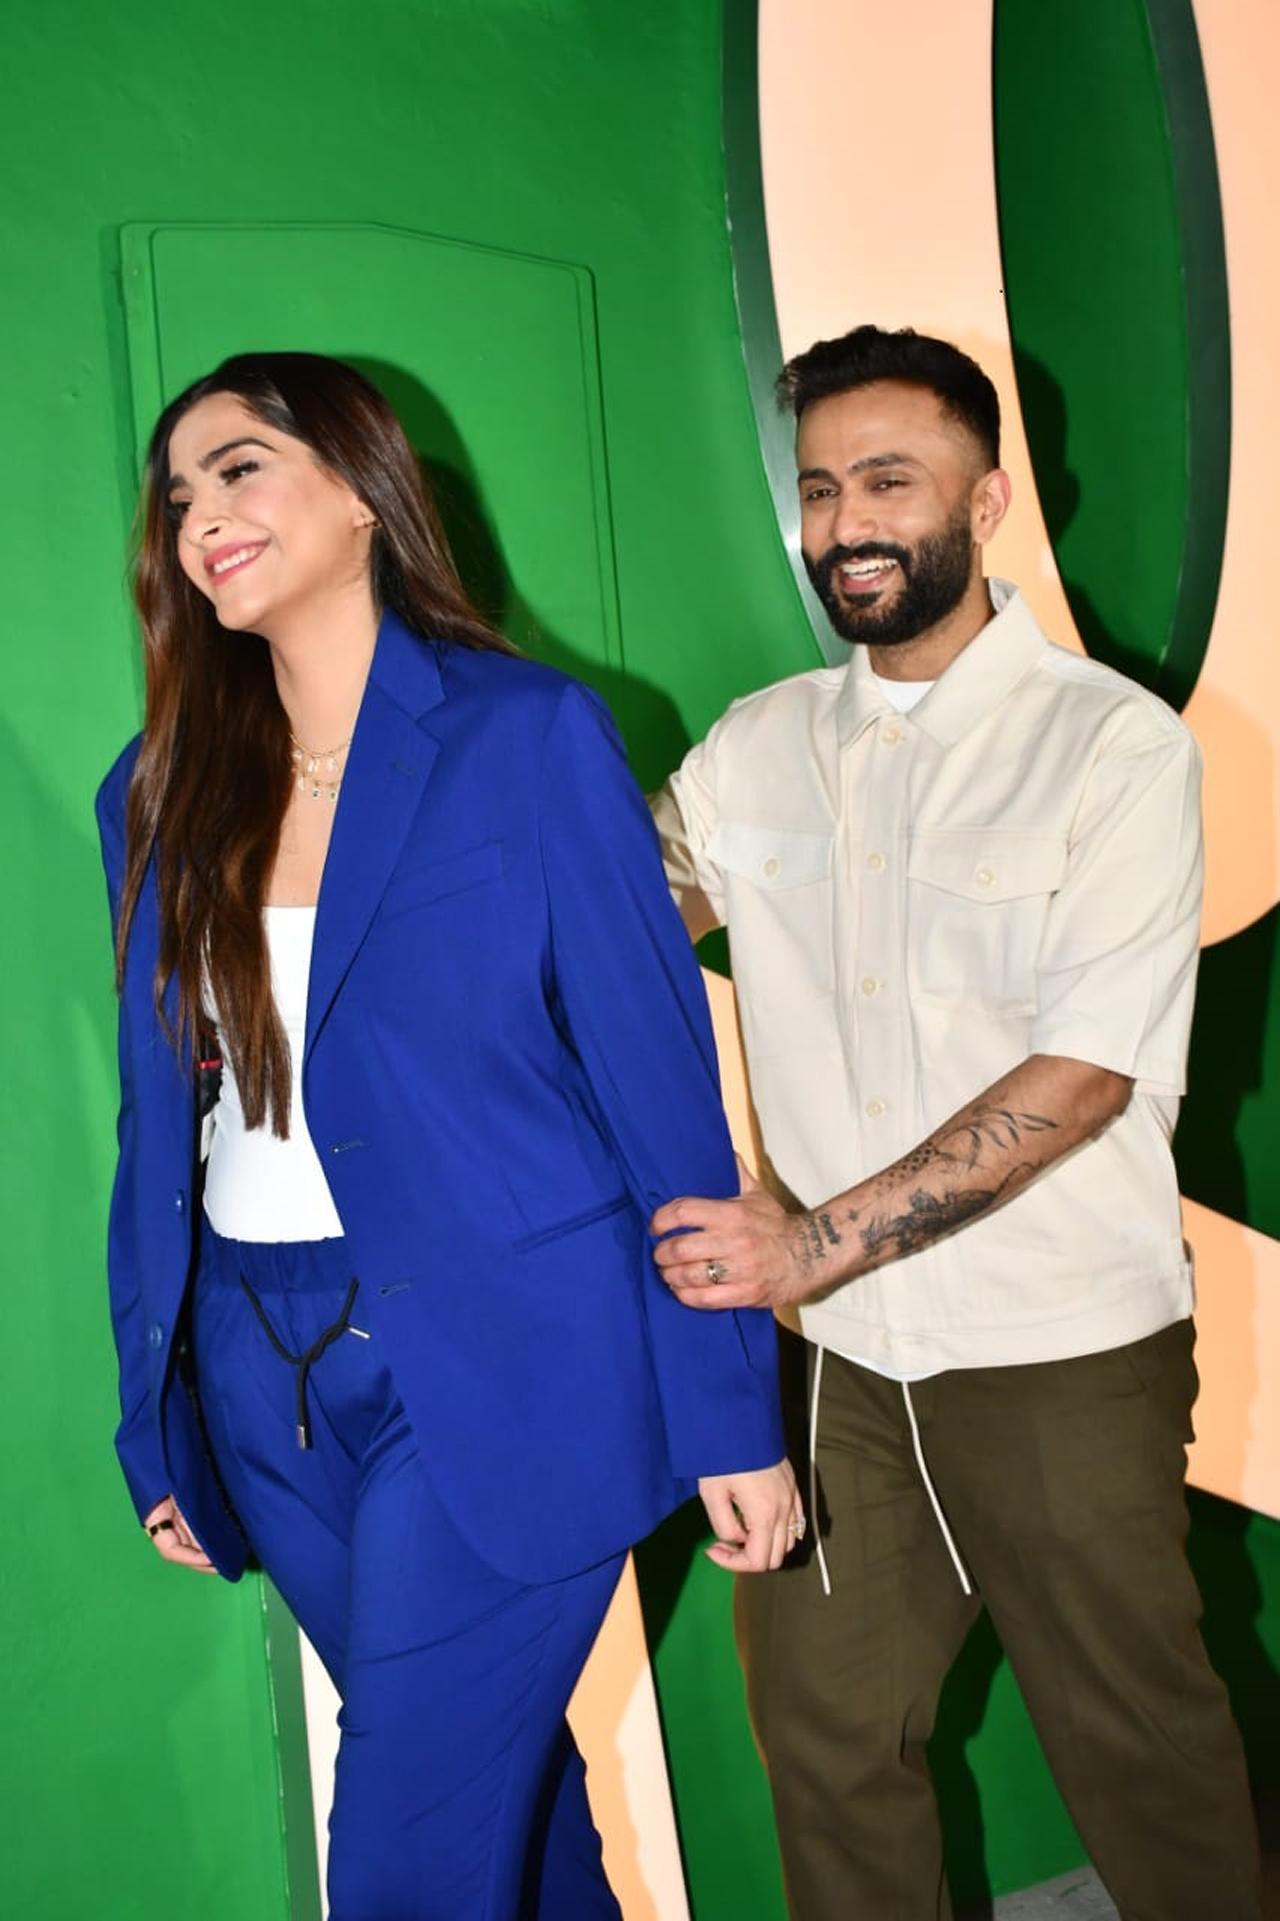 For the unversed, Sonam Kapoor and Anand Ahuja tied the knot in 2018 in a traditional wedding ceremony in Mumbai.